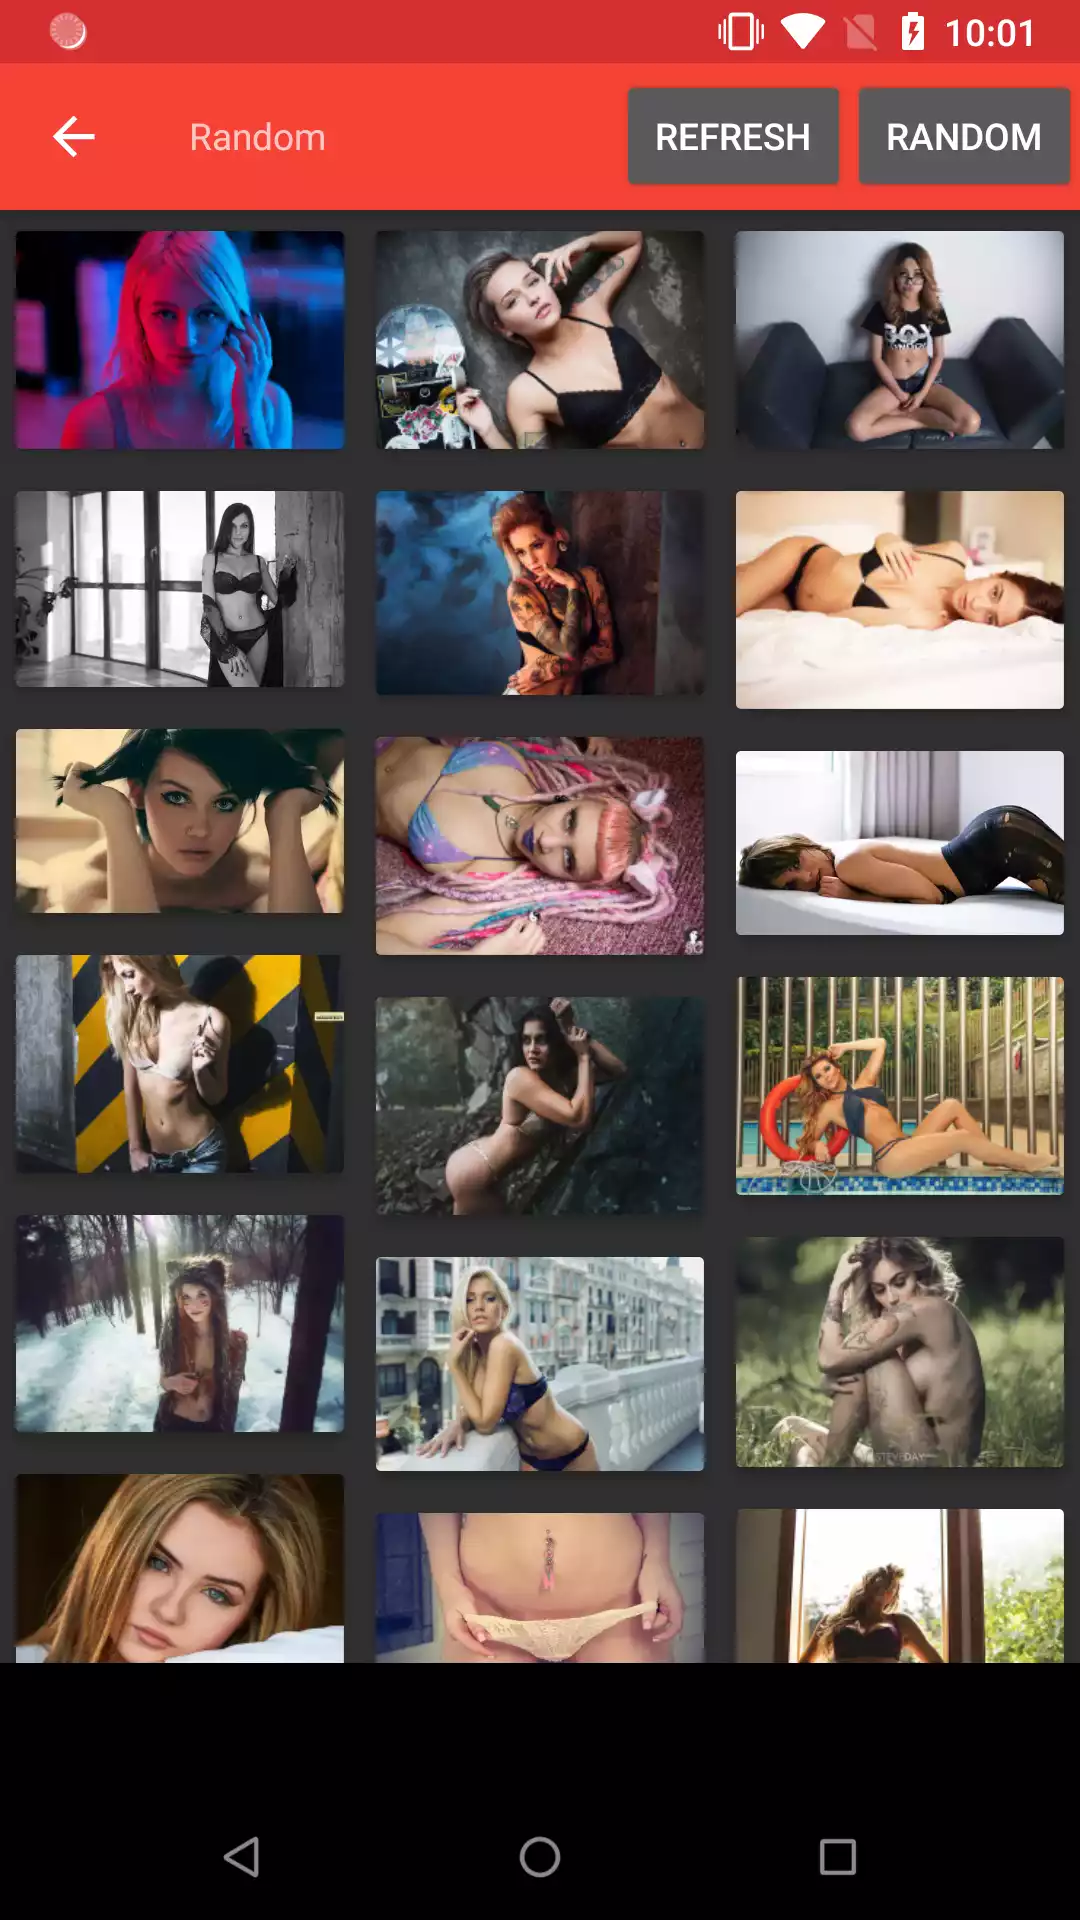 Piercing Wallpapers pics,hintai,apps,fetish,porn,gay,star,baixar,personalizations,wallpapers,backgrounds,futanari,sexy,erotic,mature,app,apk,pictures,girls,piercing,free,android,hentai,wallpaper